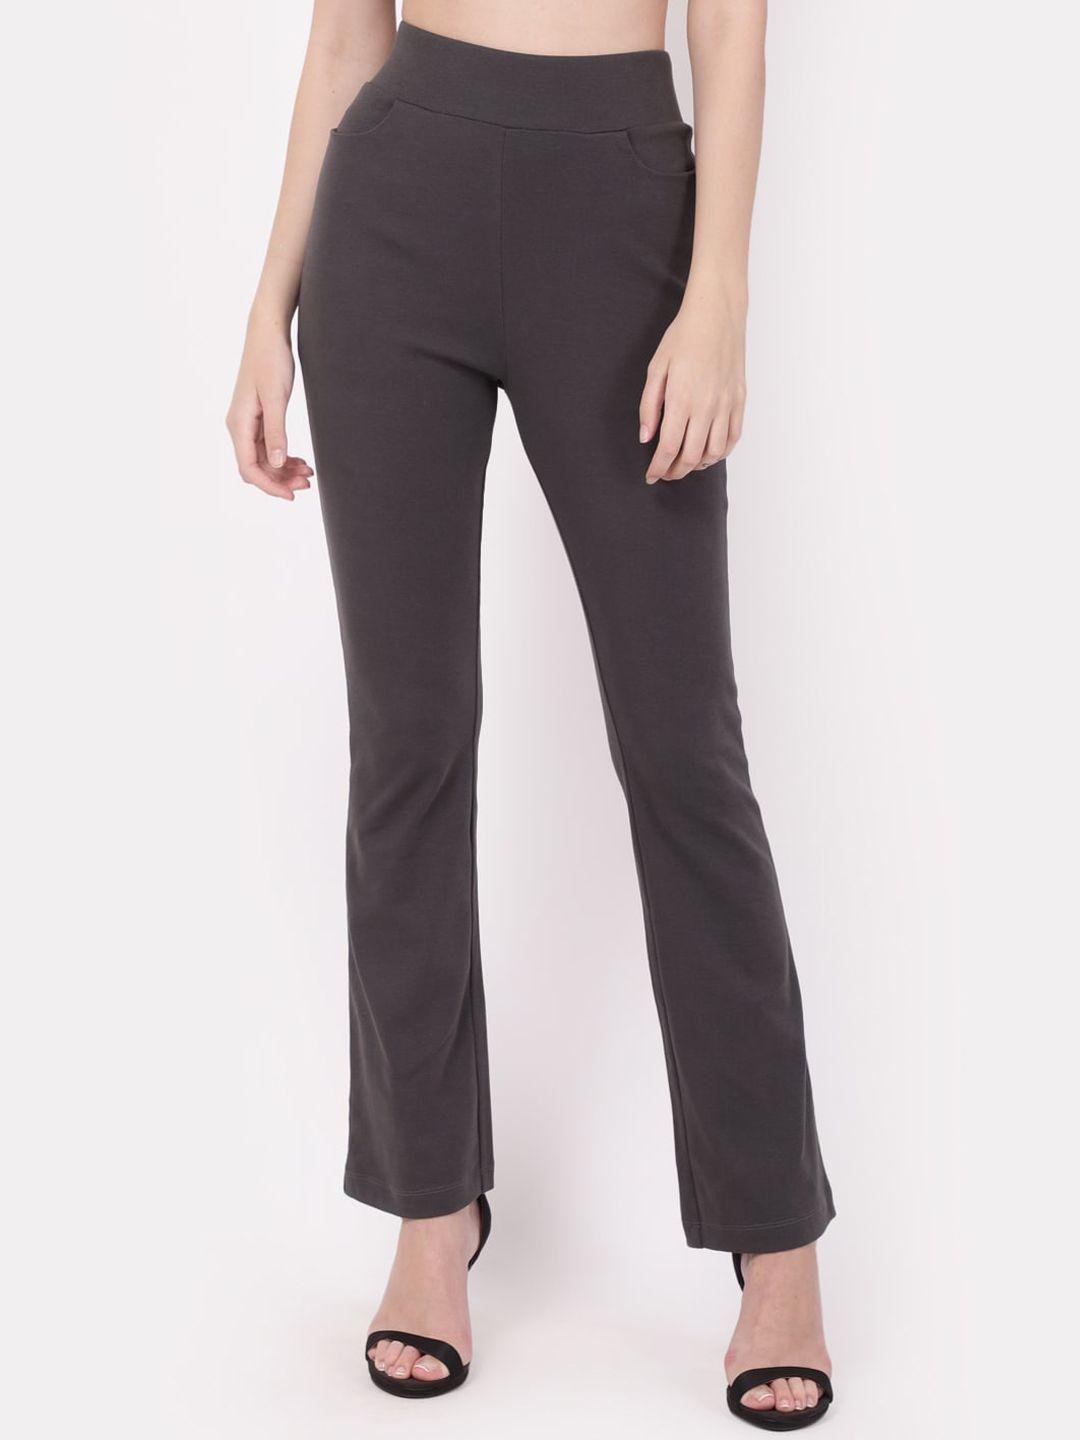 yoonoy-women-charcoal-grey-skinny-fit-high-rise-bootcut-trousers